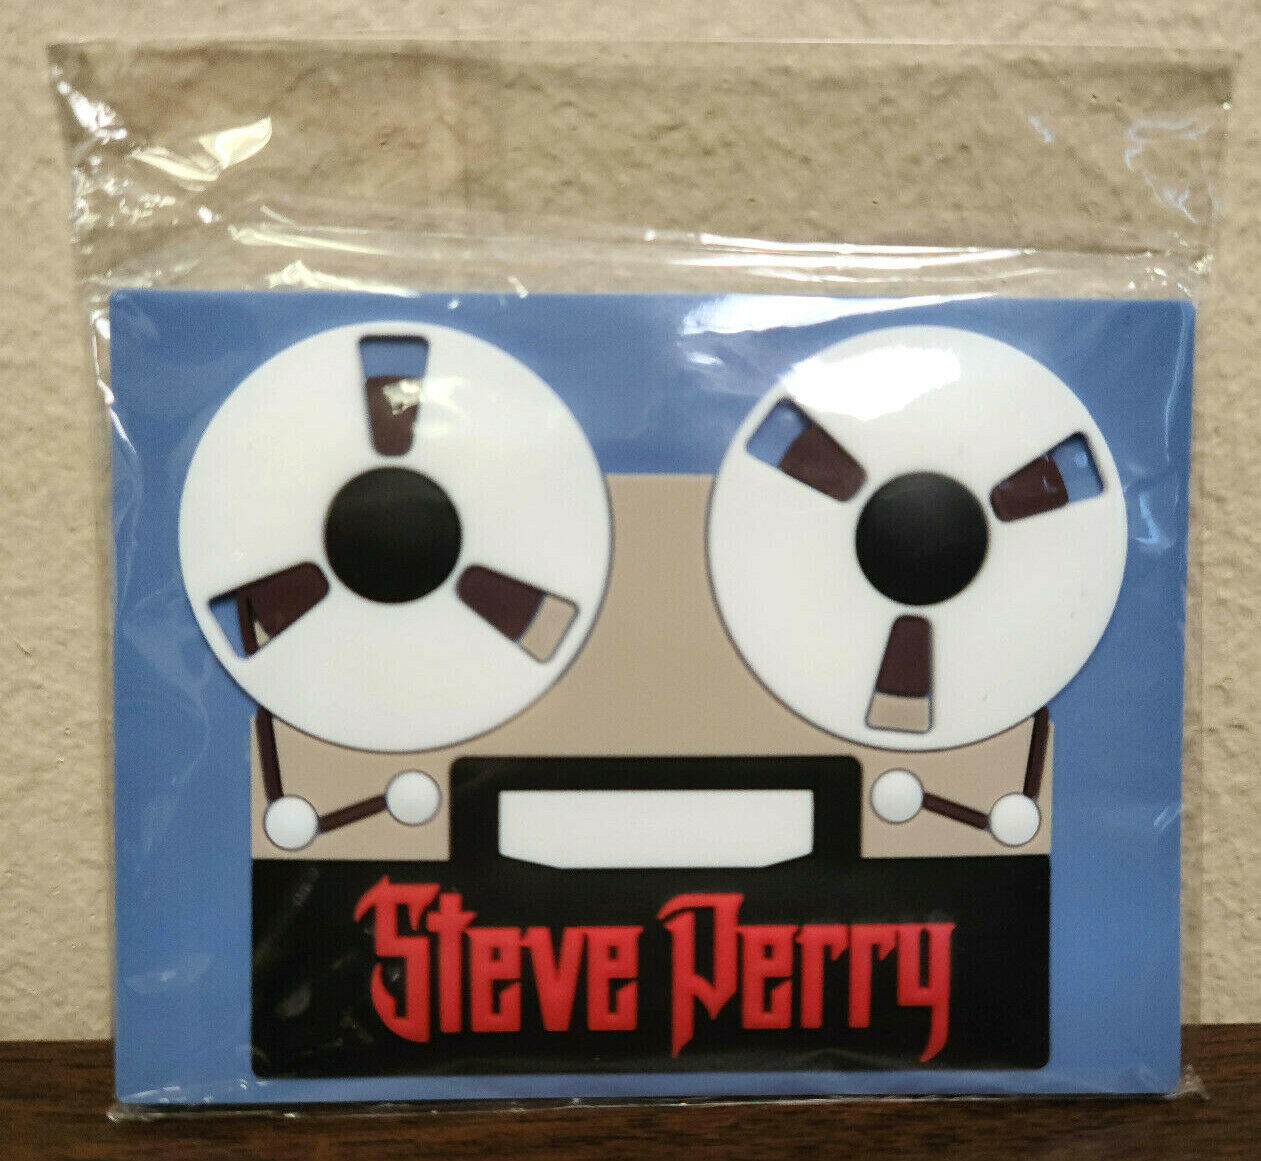 New Steve Perry Traces 3d Reel To Reel Refrigerator Magnet - Journey